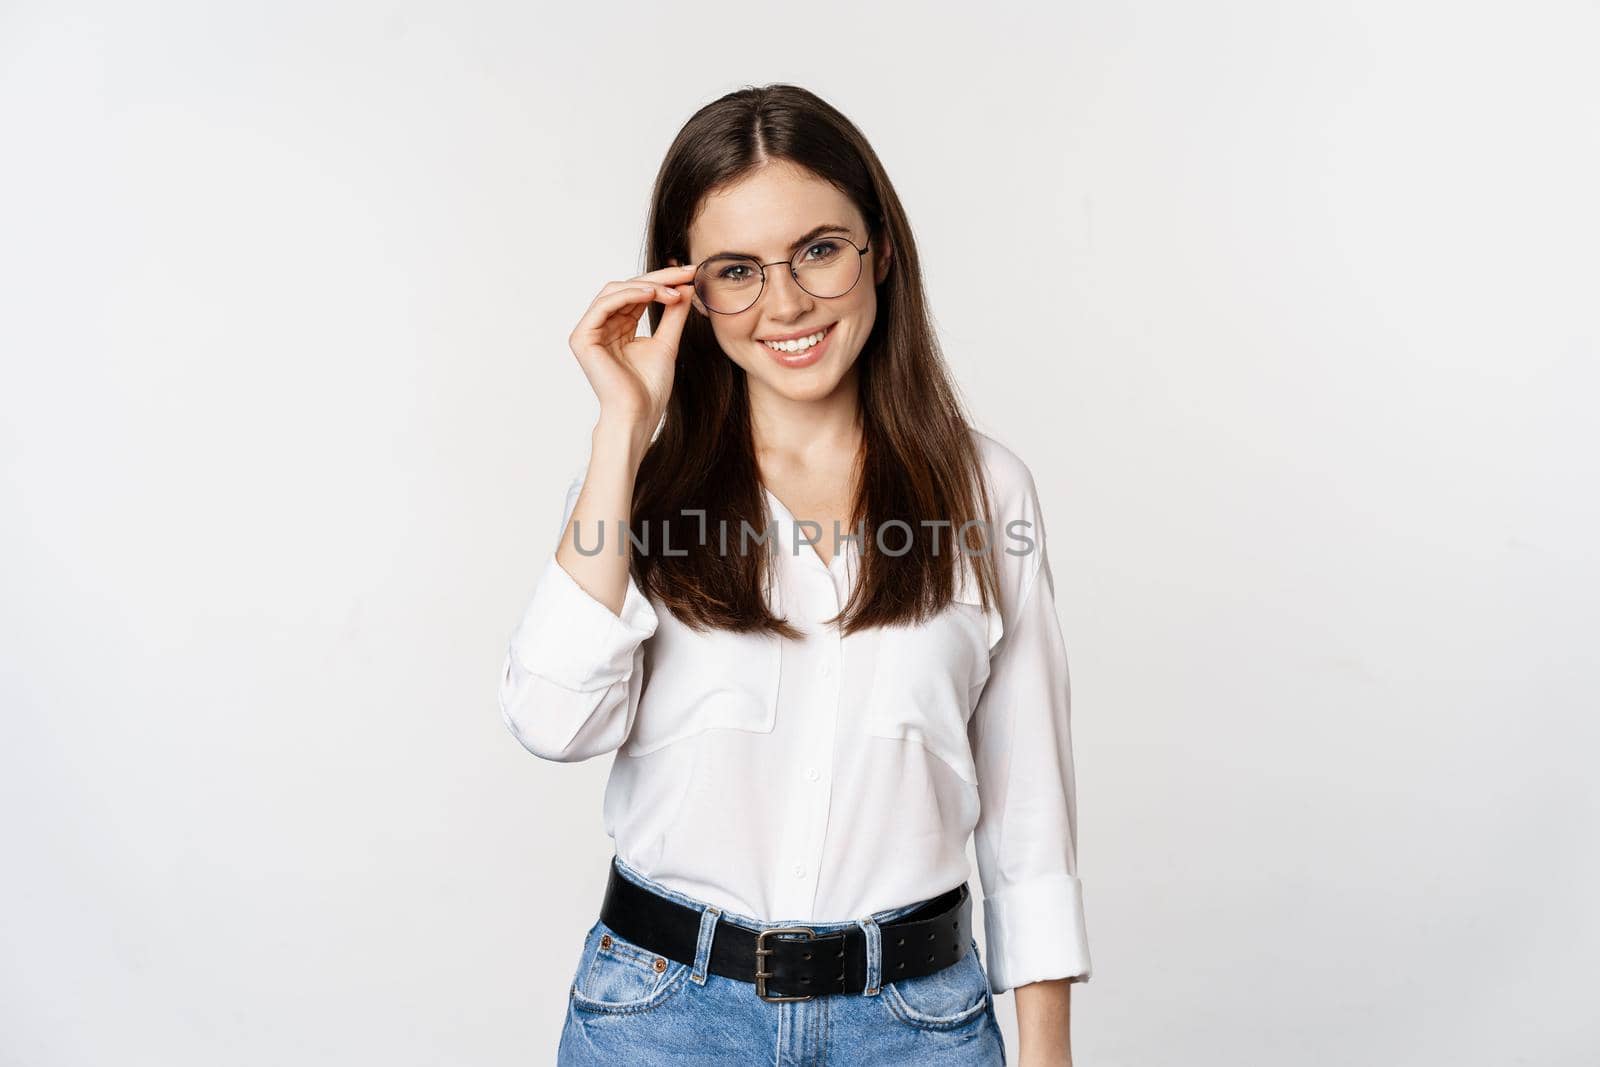 Portrait of female office worker, businesswoman looking at camera and smiling, standing over white background. Copy space